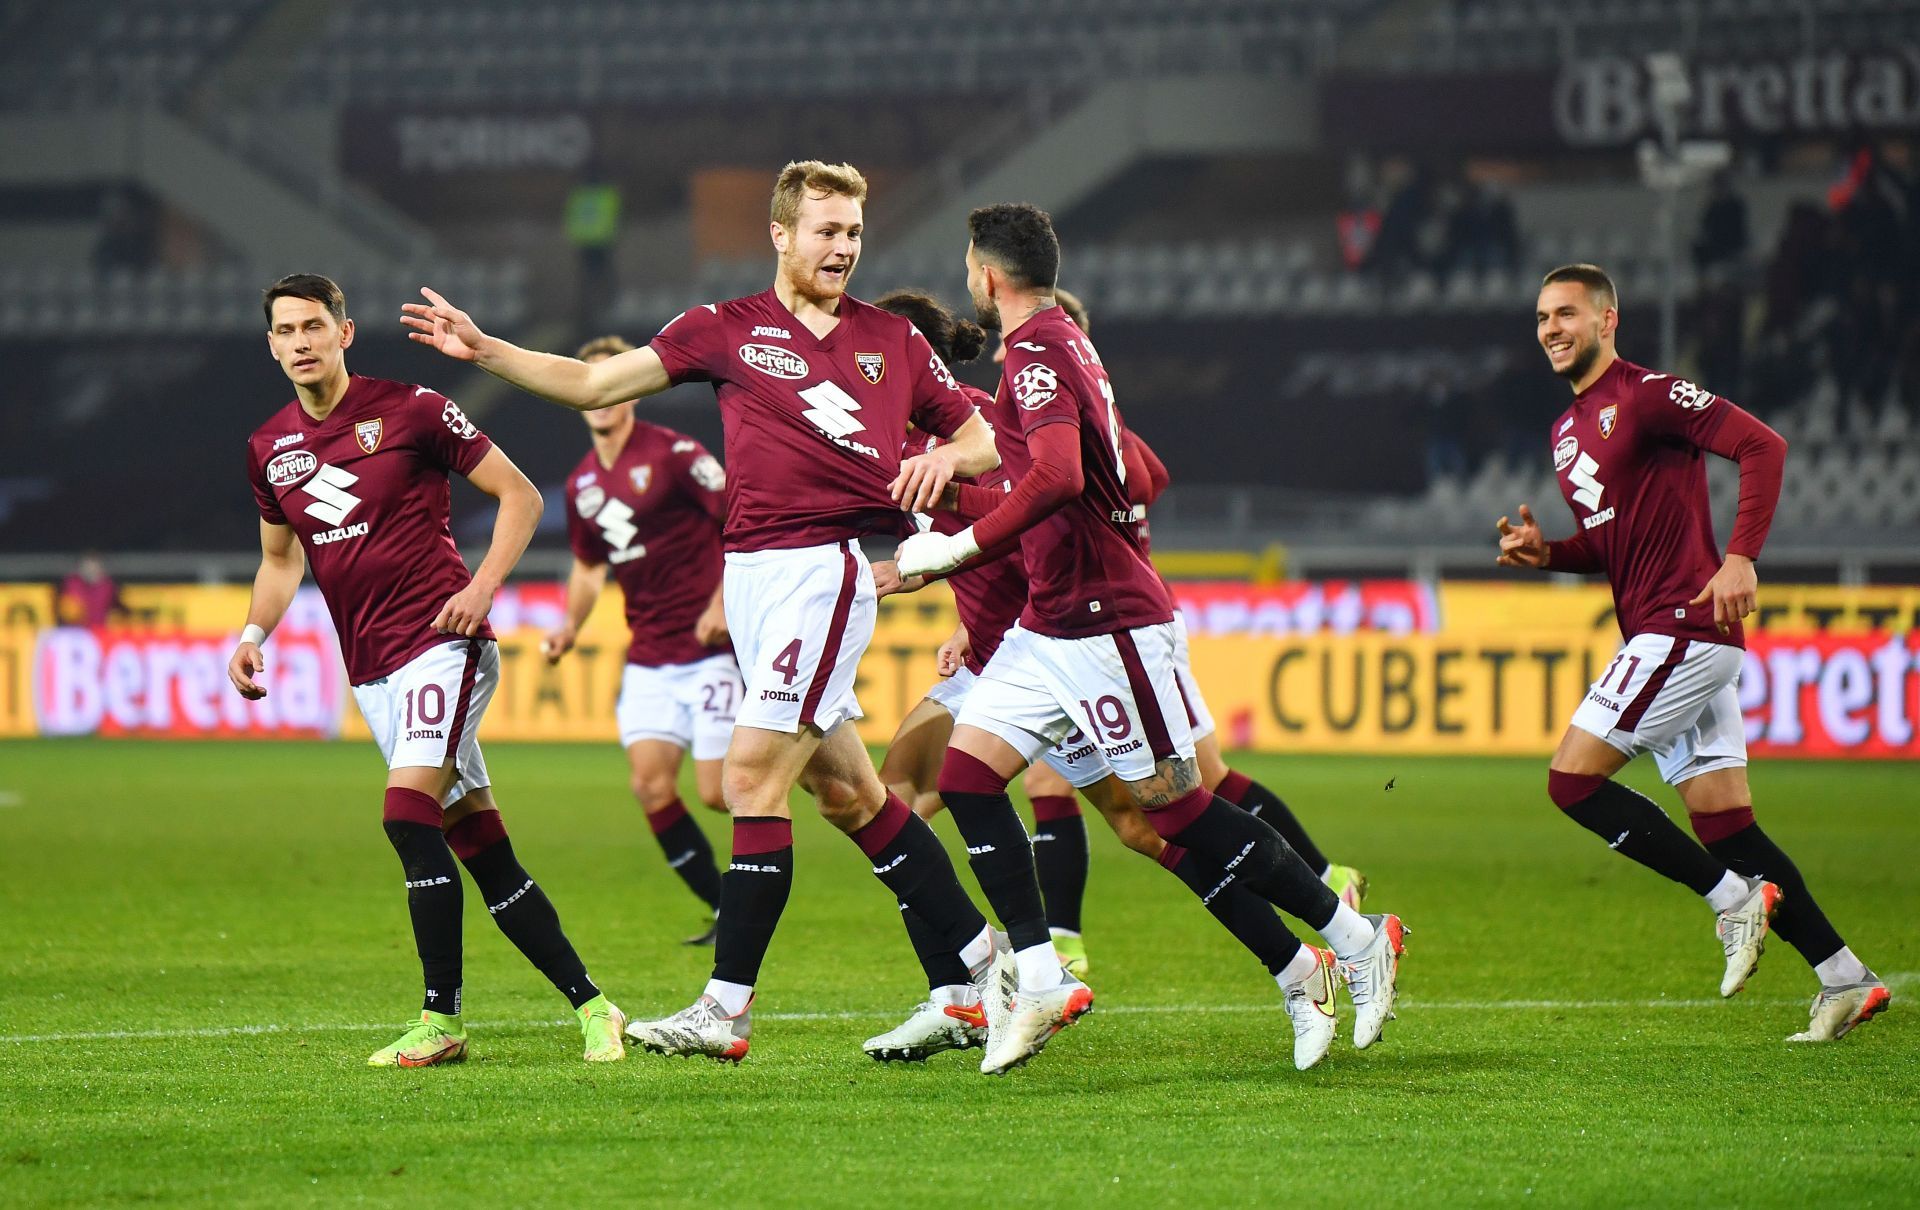 Torino face Fiorentina in their first Serie A game of 2022 on Sunday